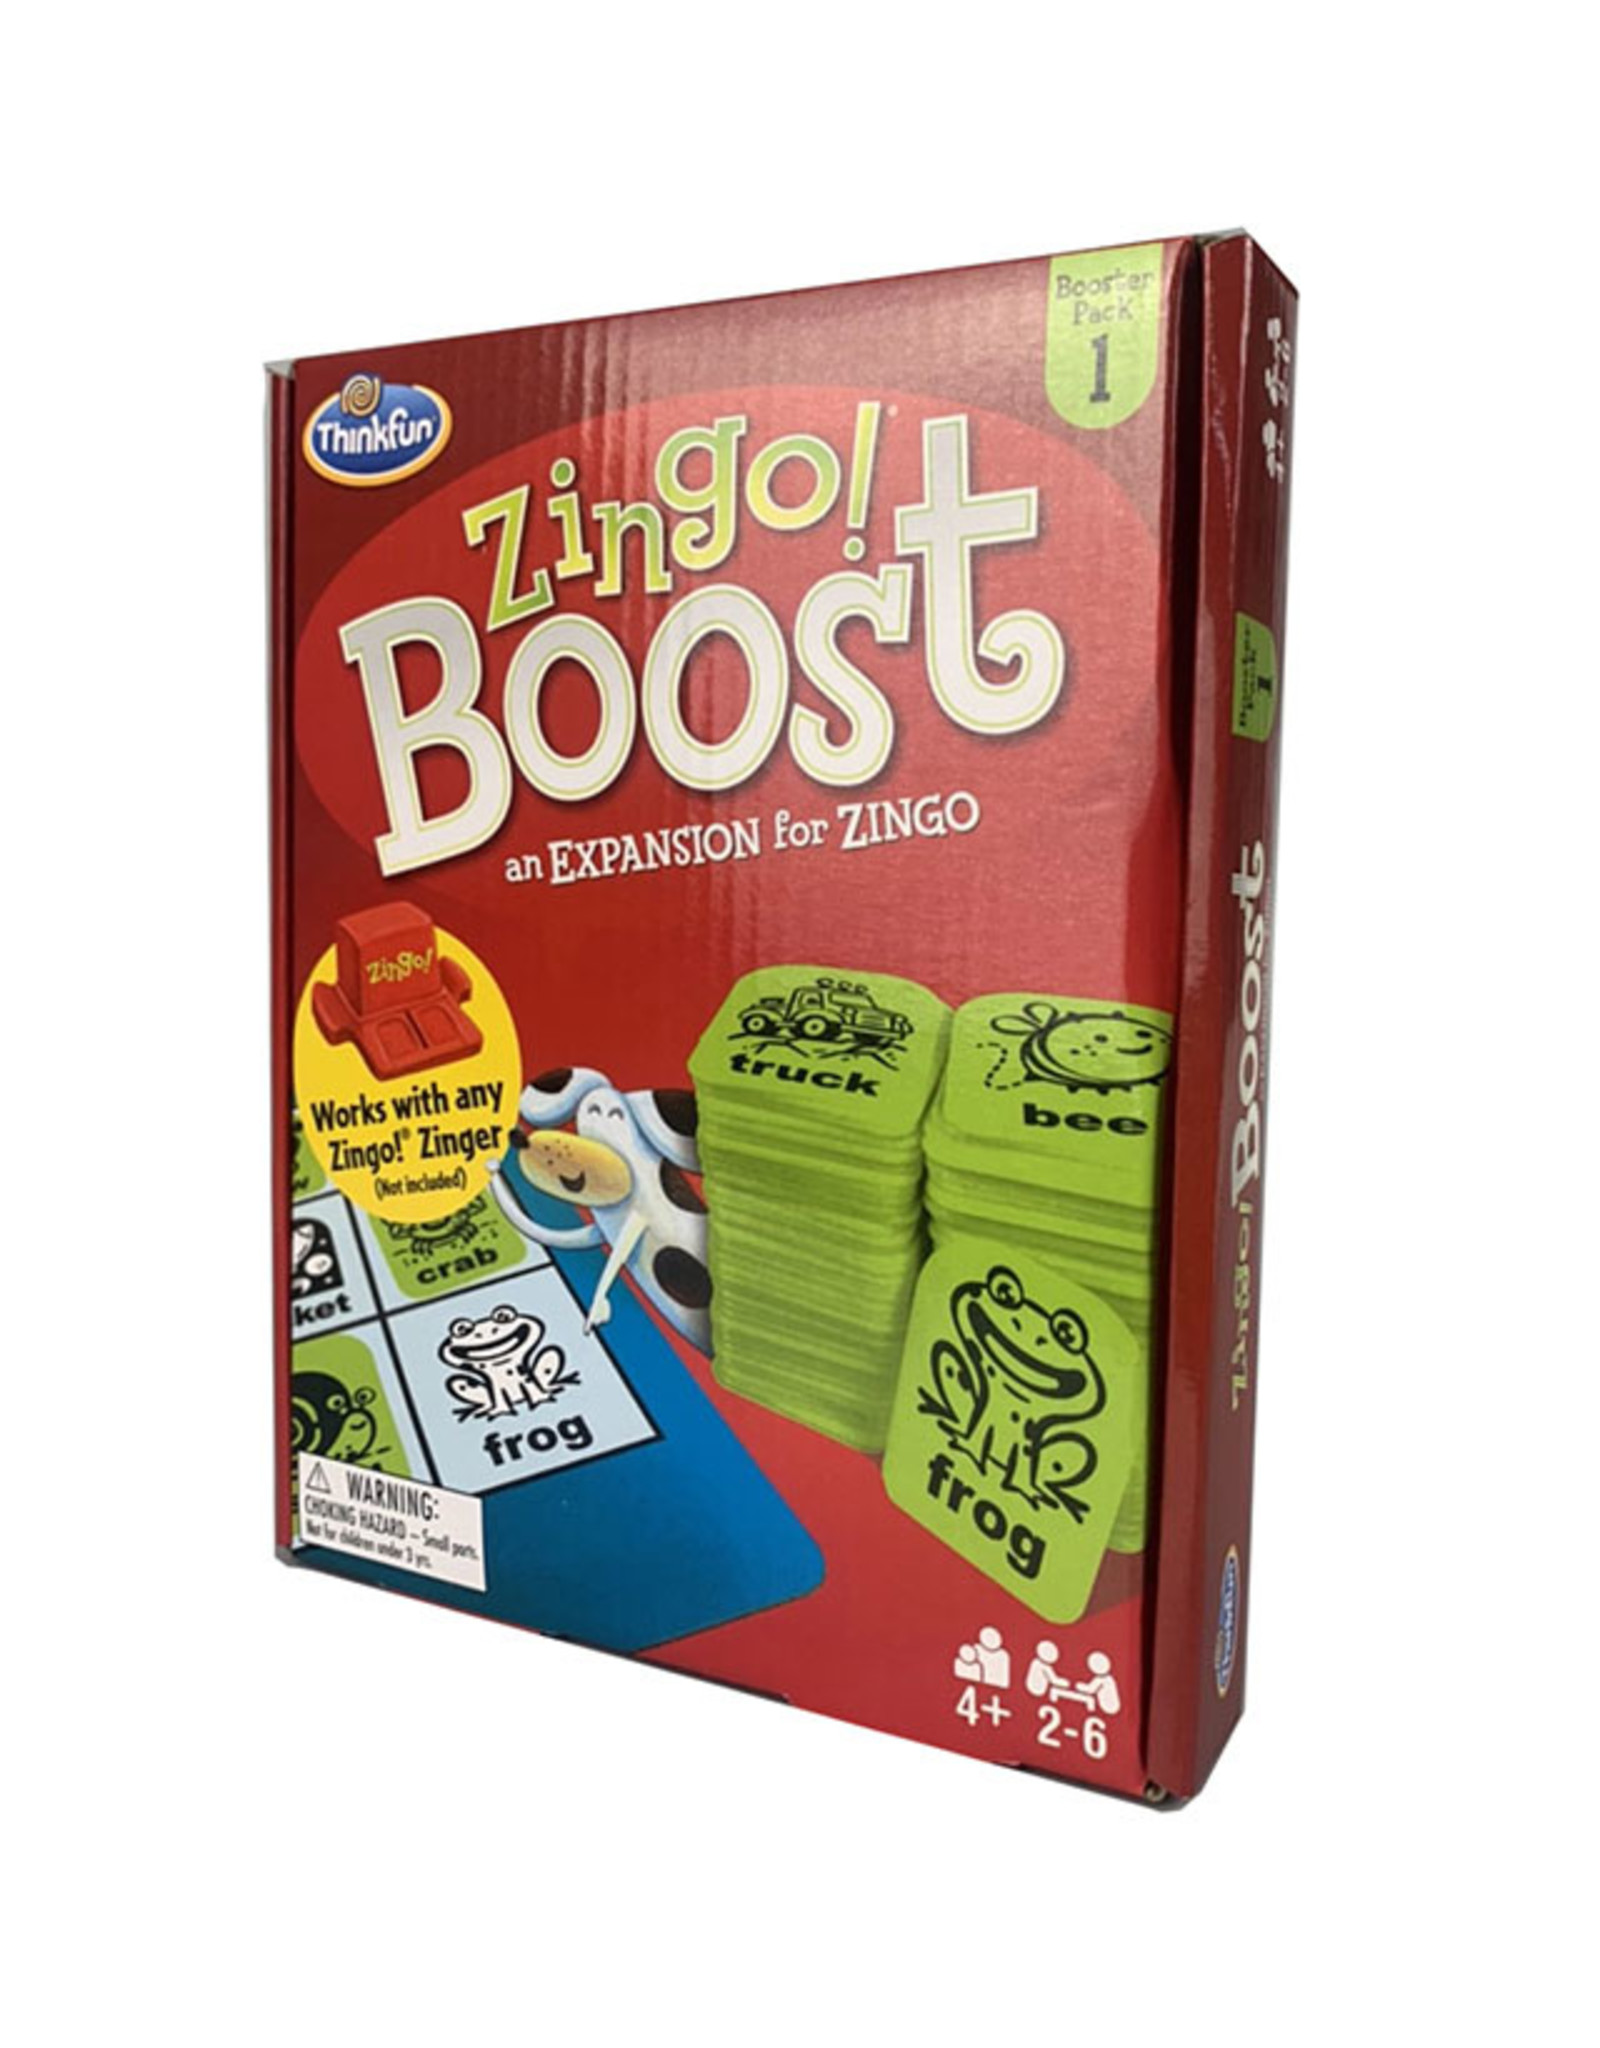 Think Fun Zingo! Boost Booster Pack #1